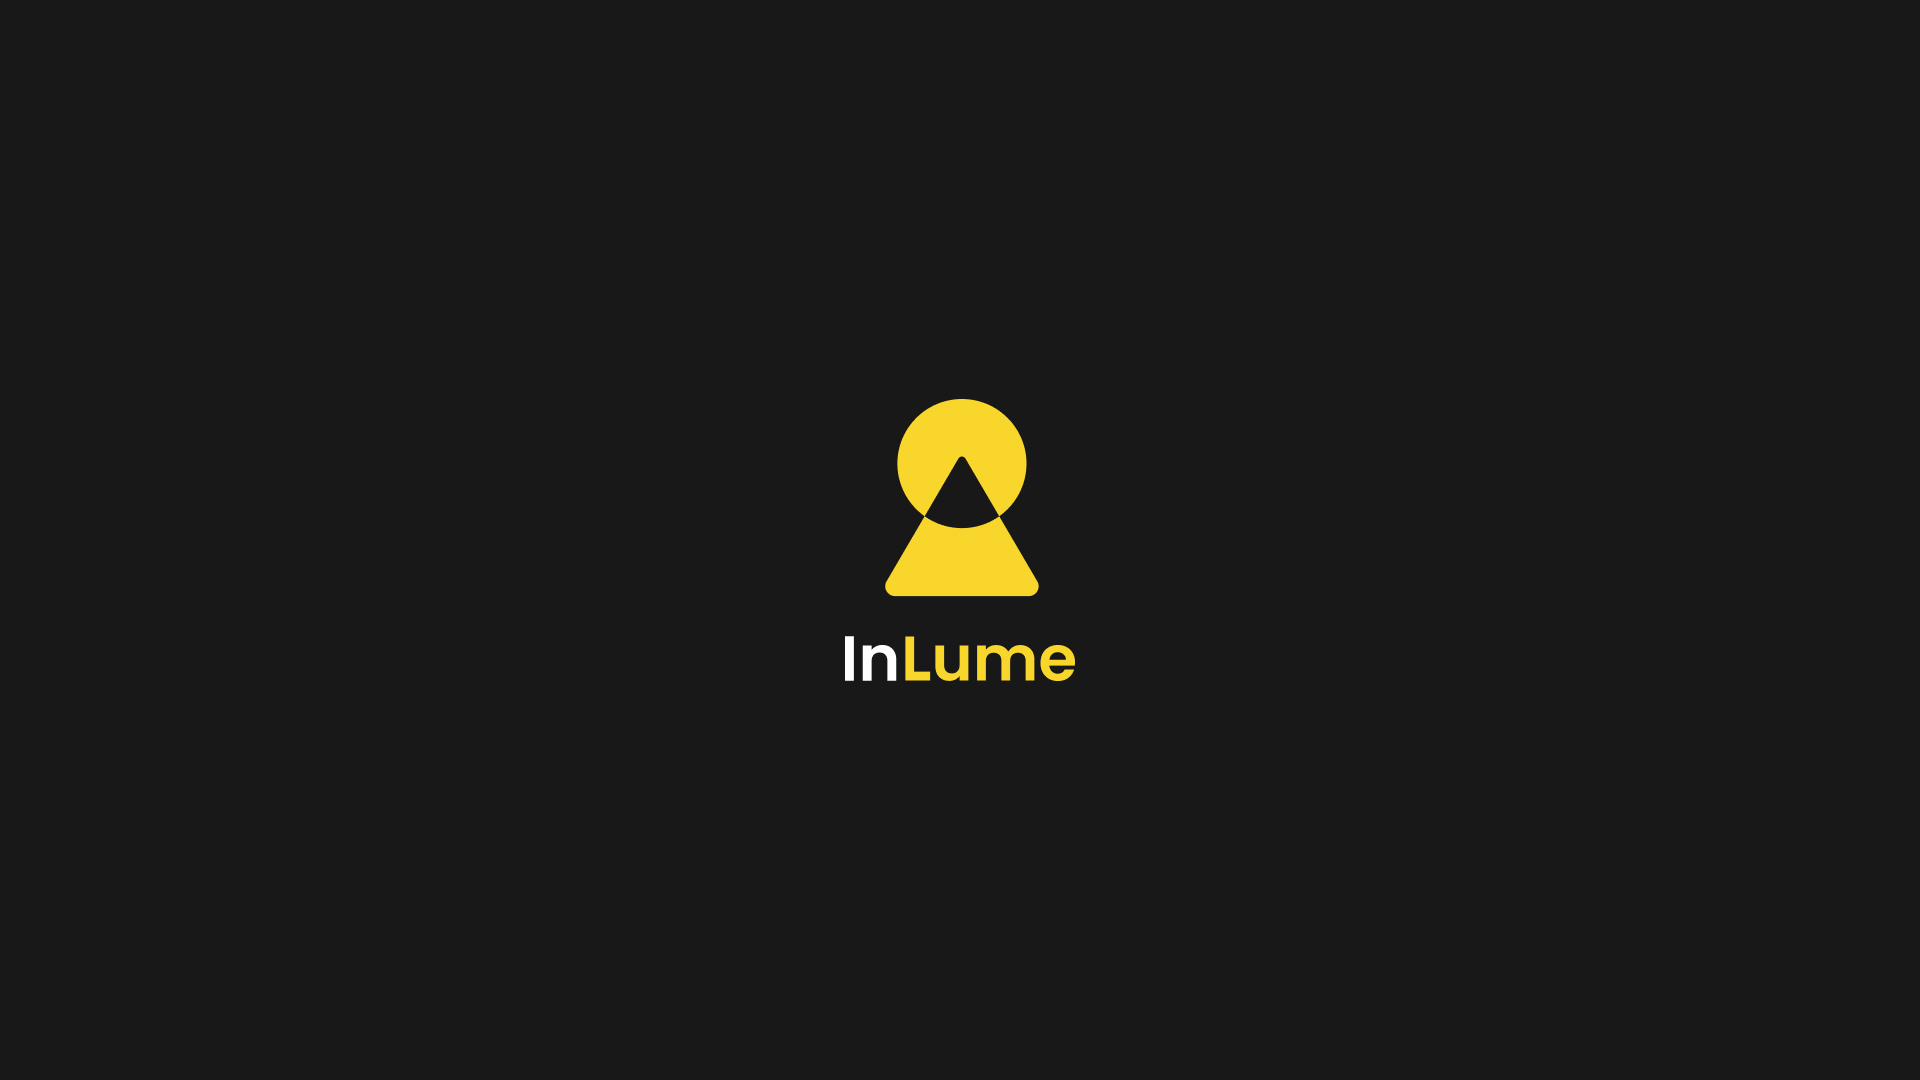 Image for inlume